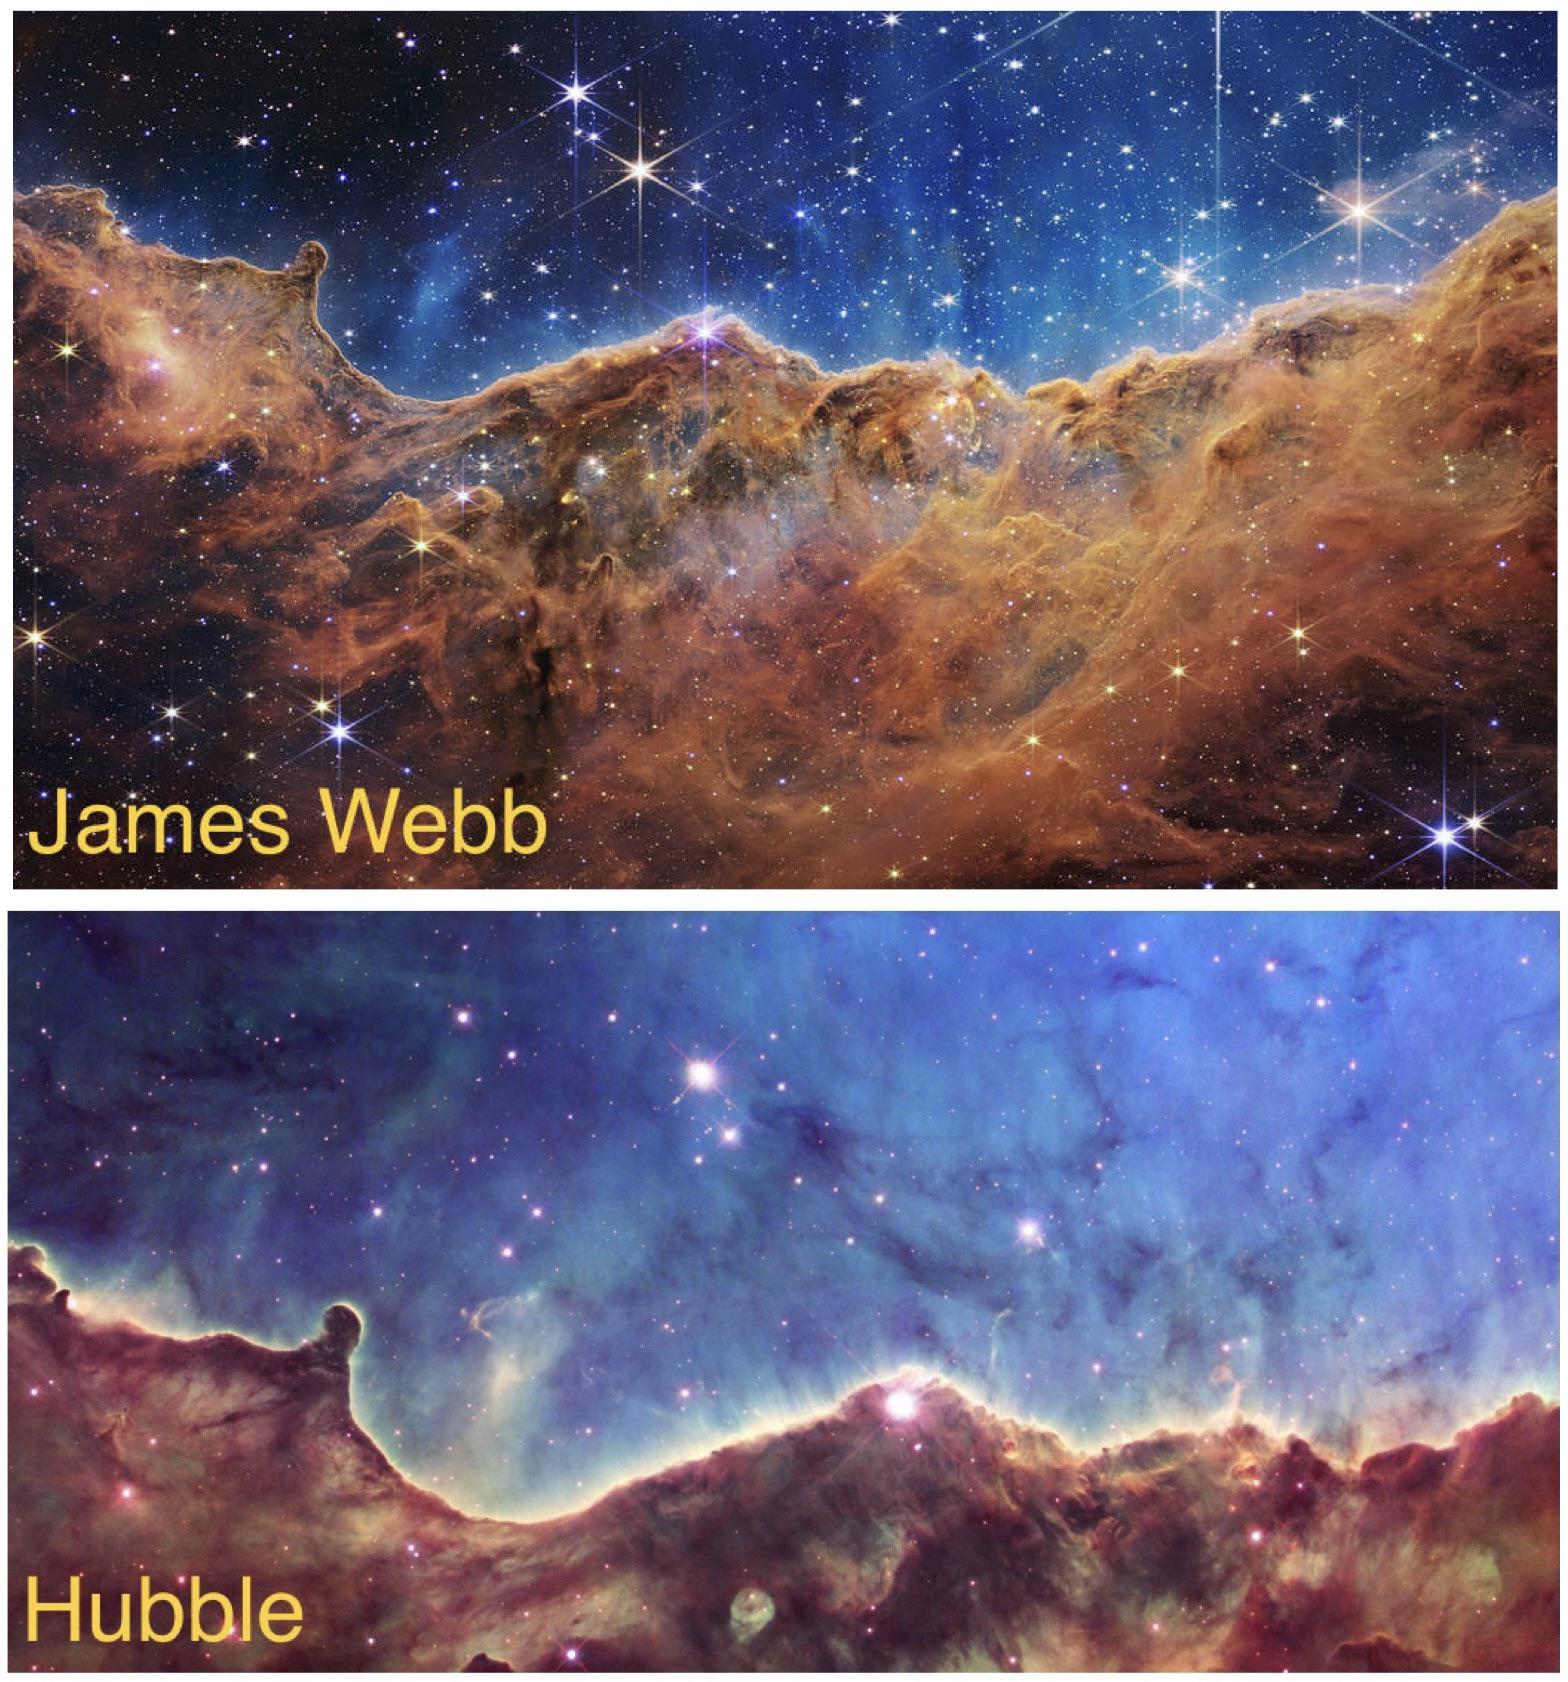 James Webb compared to Hubble